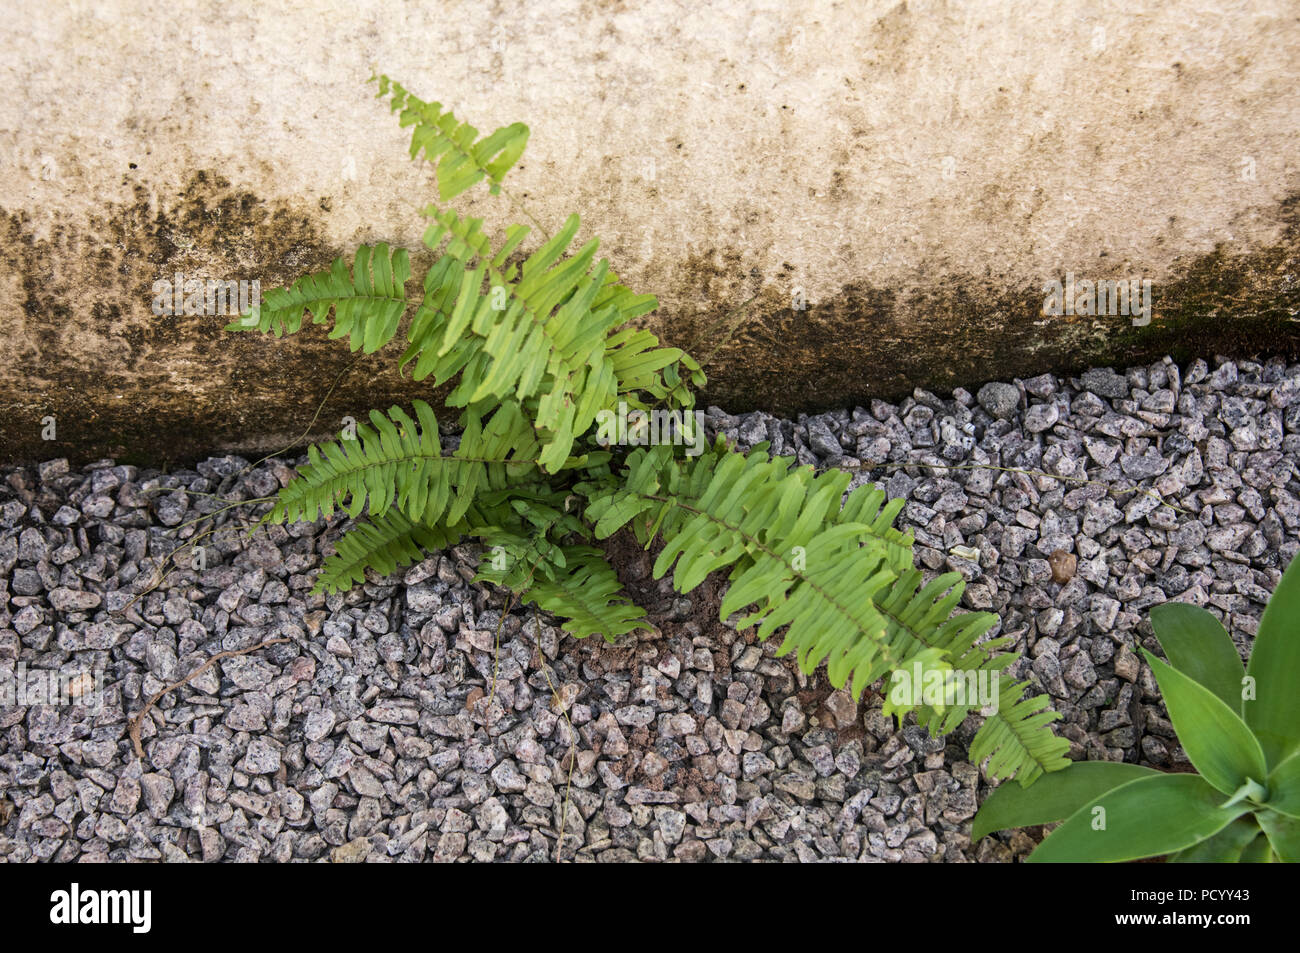 Fern growing in a gravel bed at the base of a wall Stock Photo